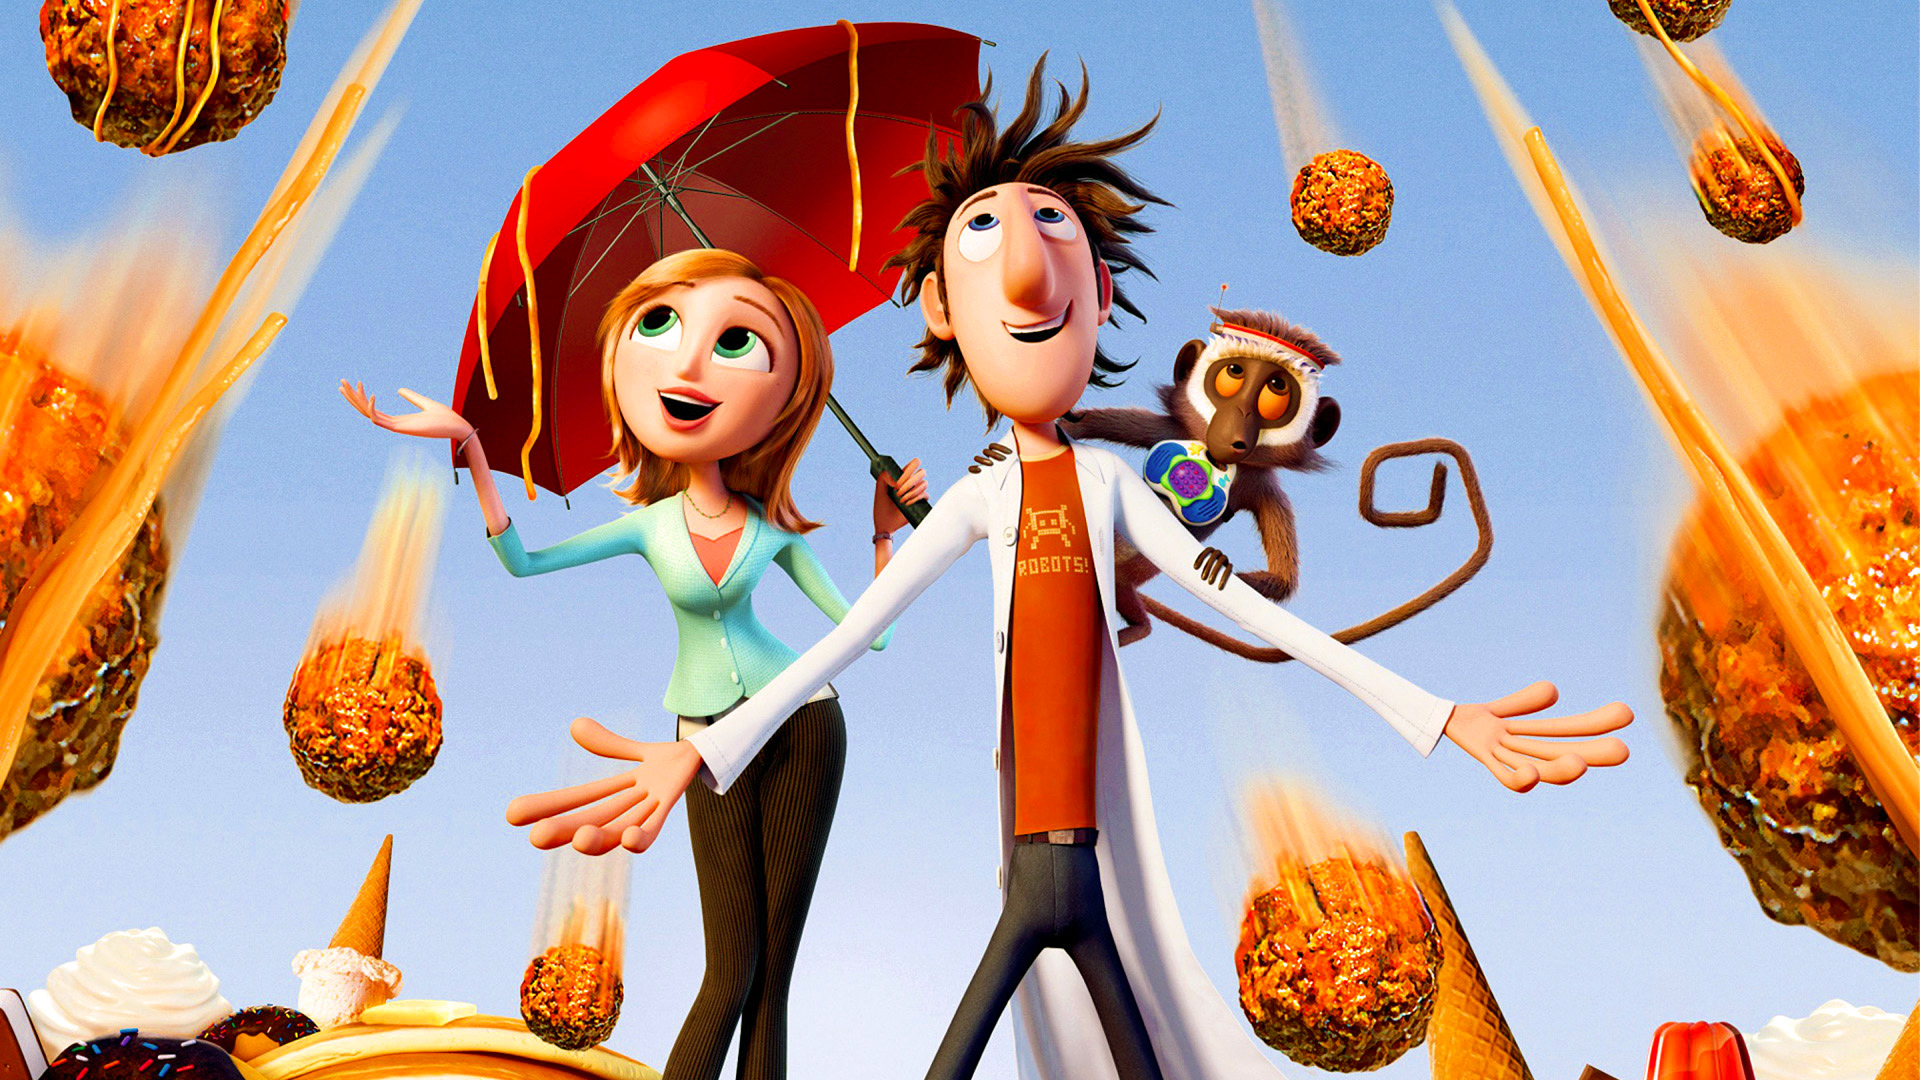 Cloudy with a Chance of Meatballs HD Wallpapers and Backgrounds. 